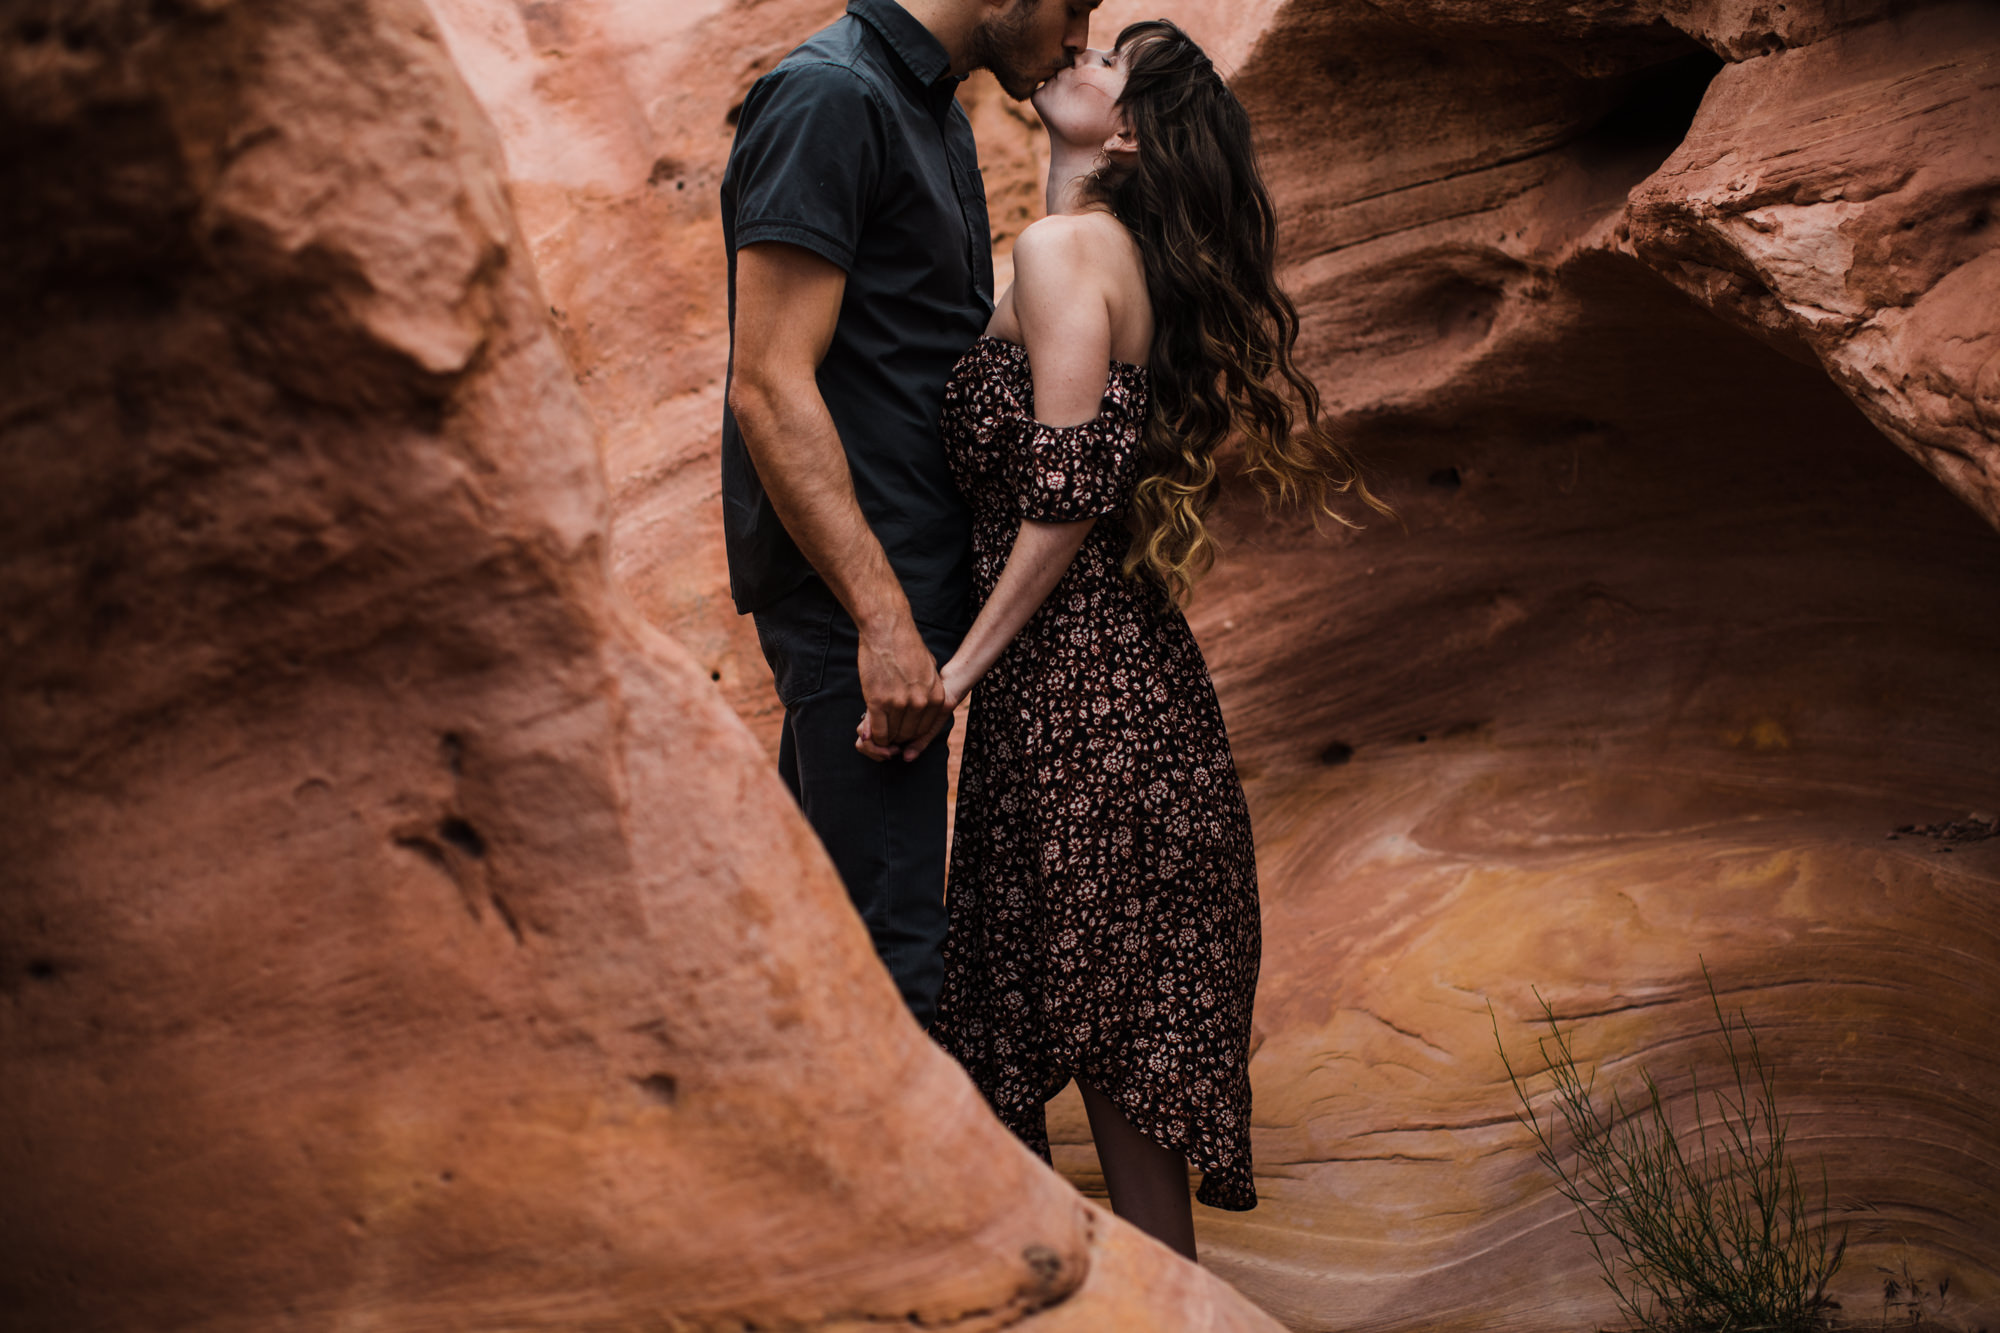 Glen Canyon National Recreation Area | Lake Powell Slot Canyon and Overlook Engagement Session | Utah Adventure Wedding Photographer | www.thehearnes.com